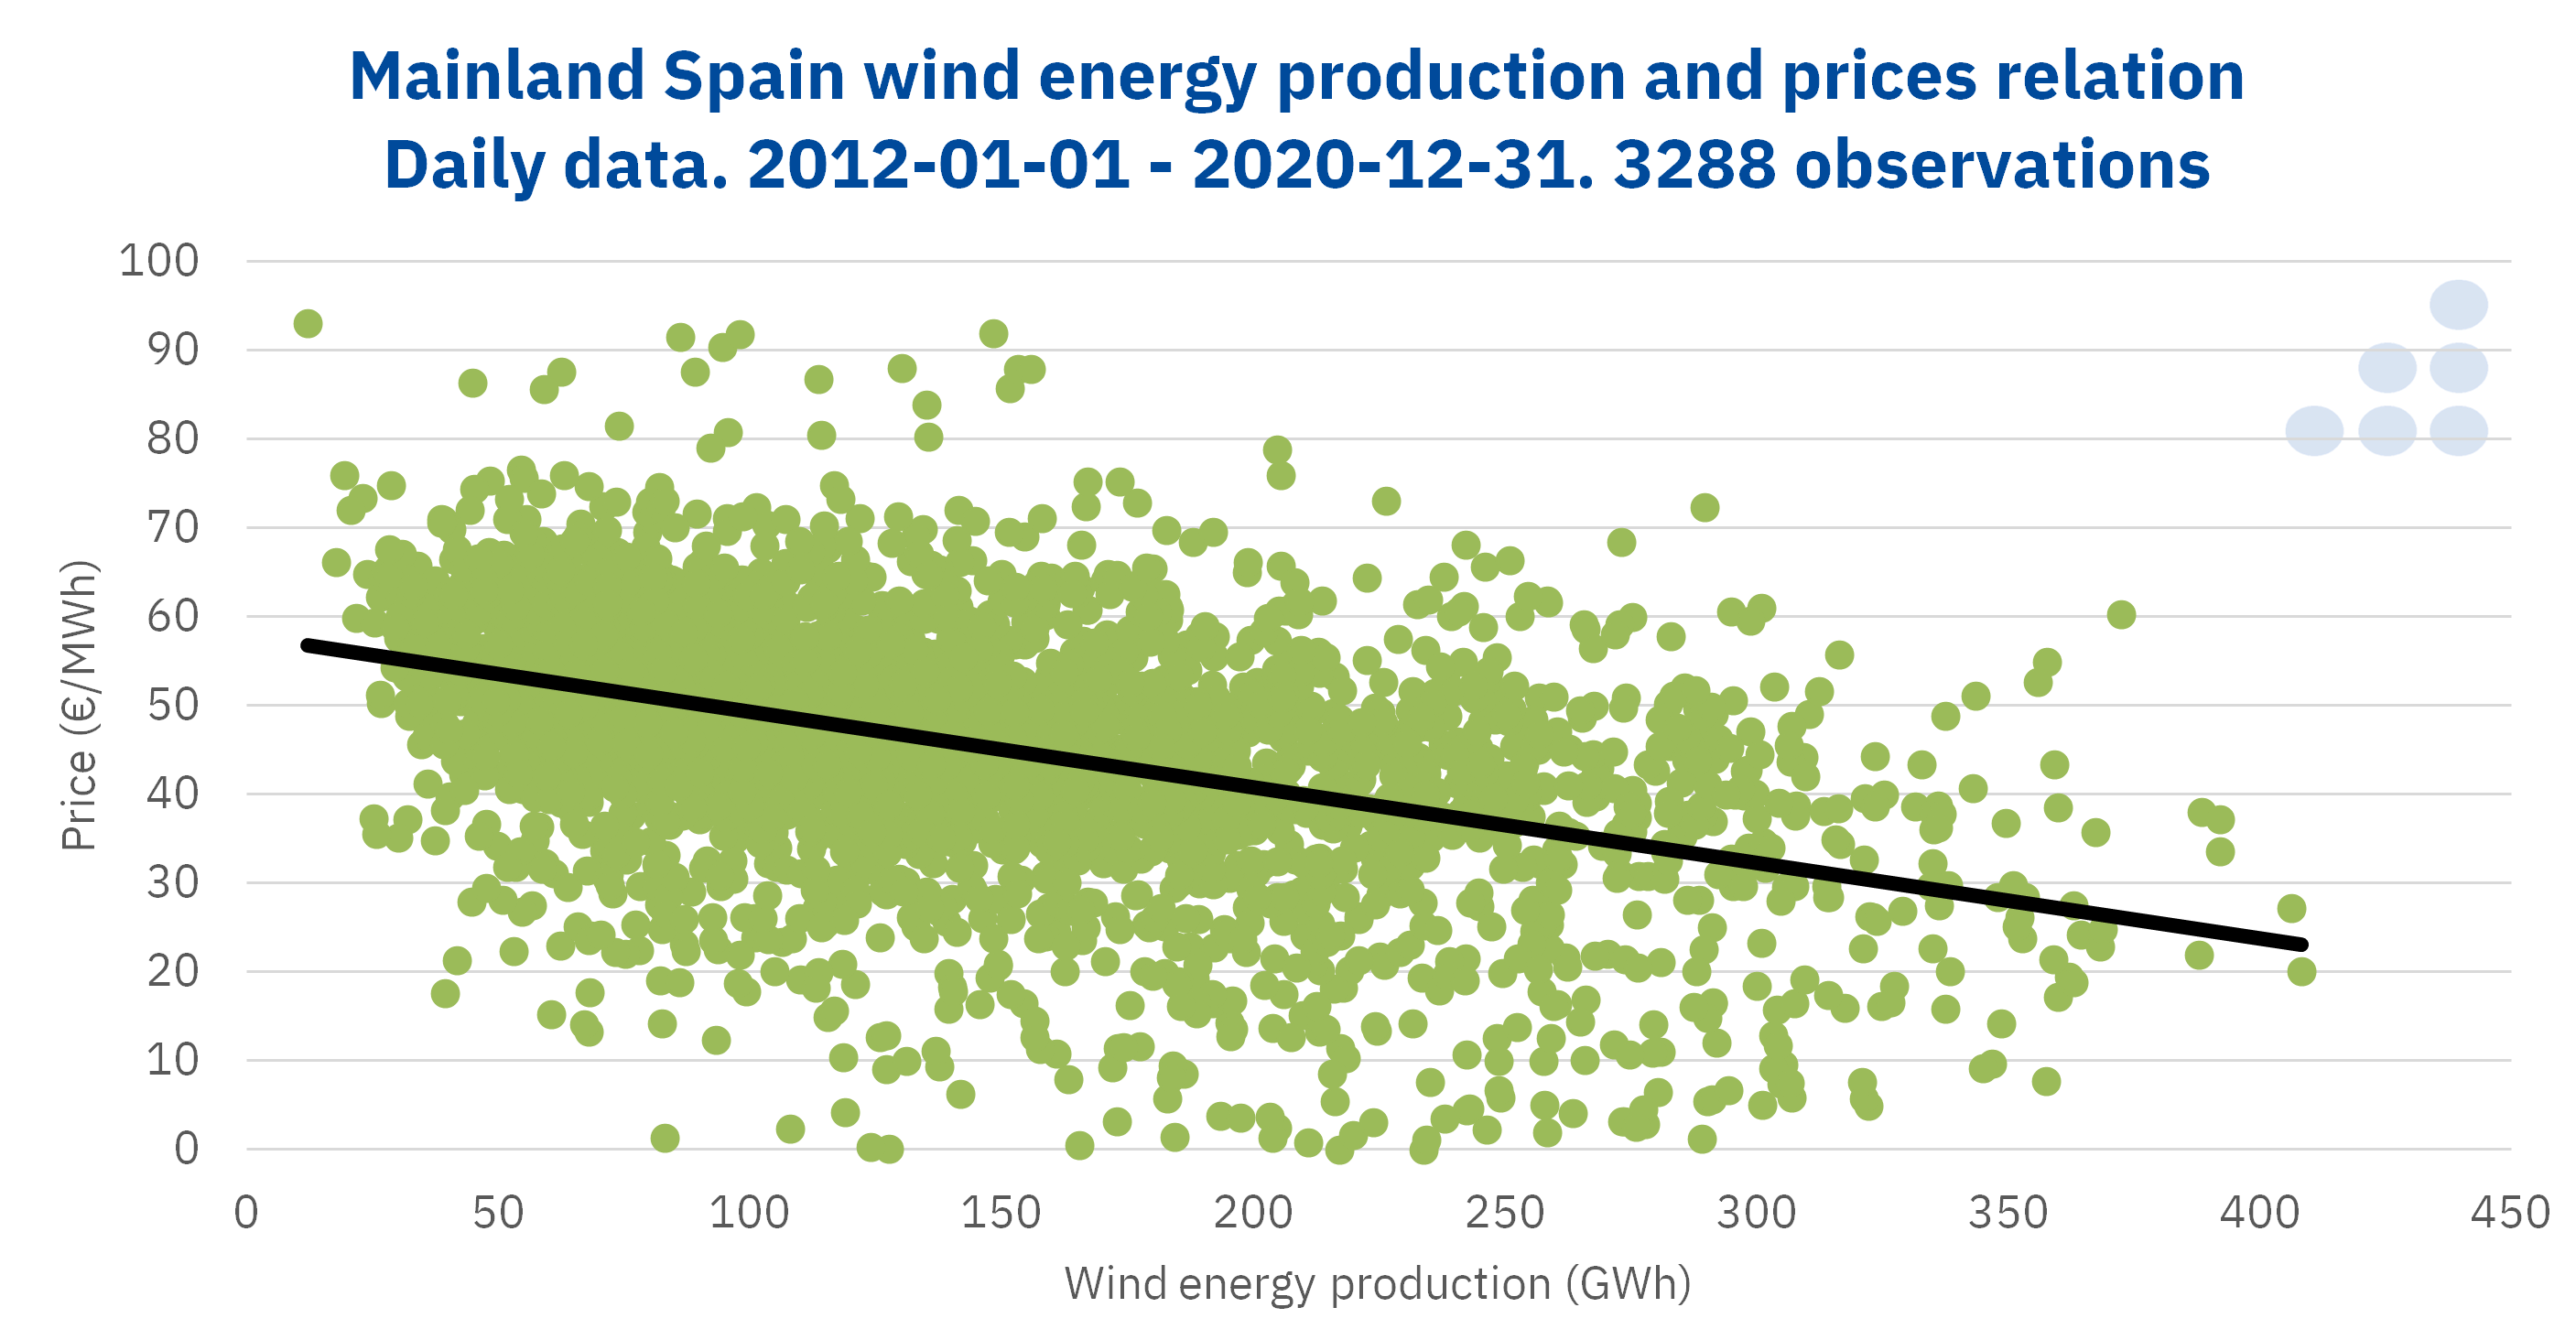 AleaSoft - Mainland spain wind energy production prices relation